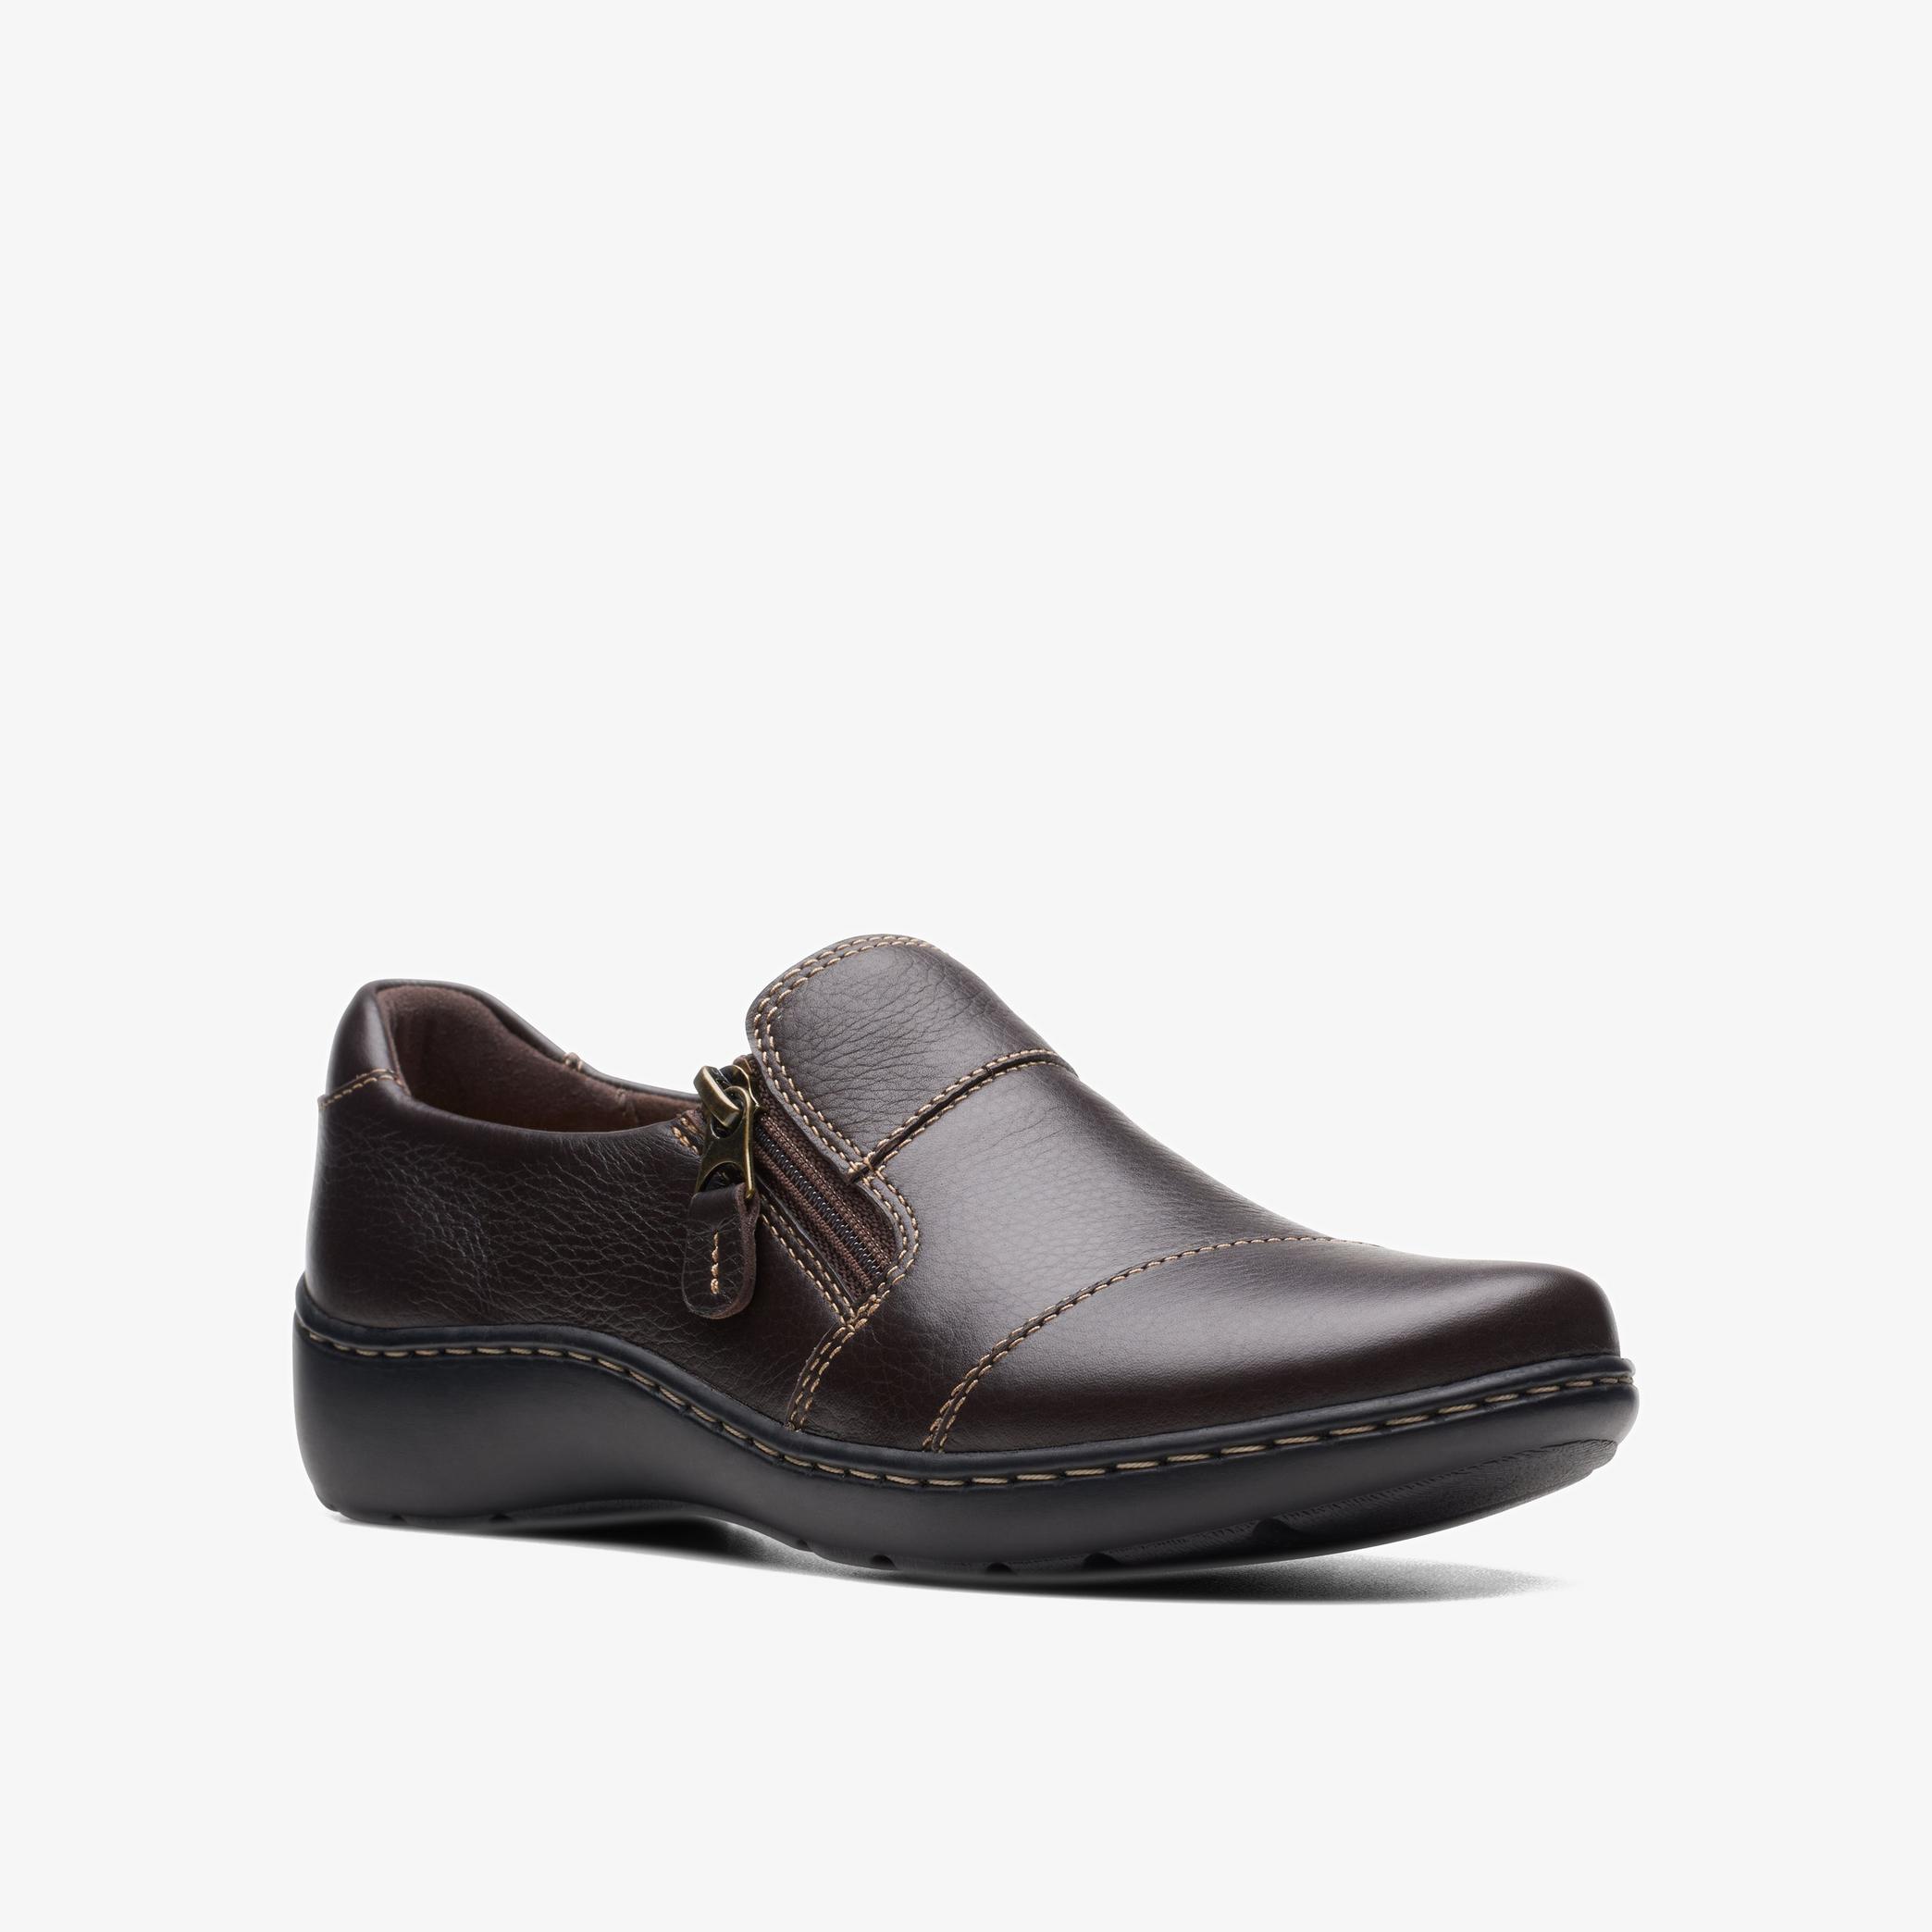 WOMENS Cora Harbor Dark Brown Leather Shoes | Clarks Outlet